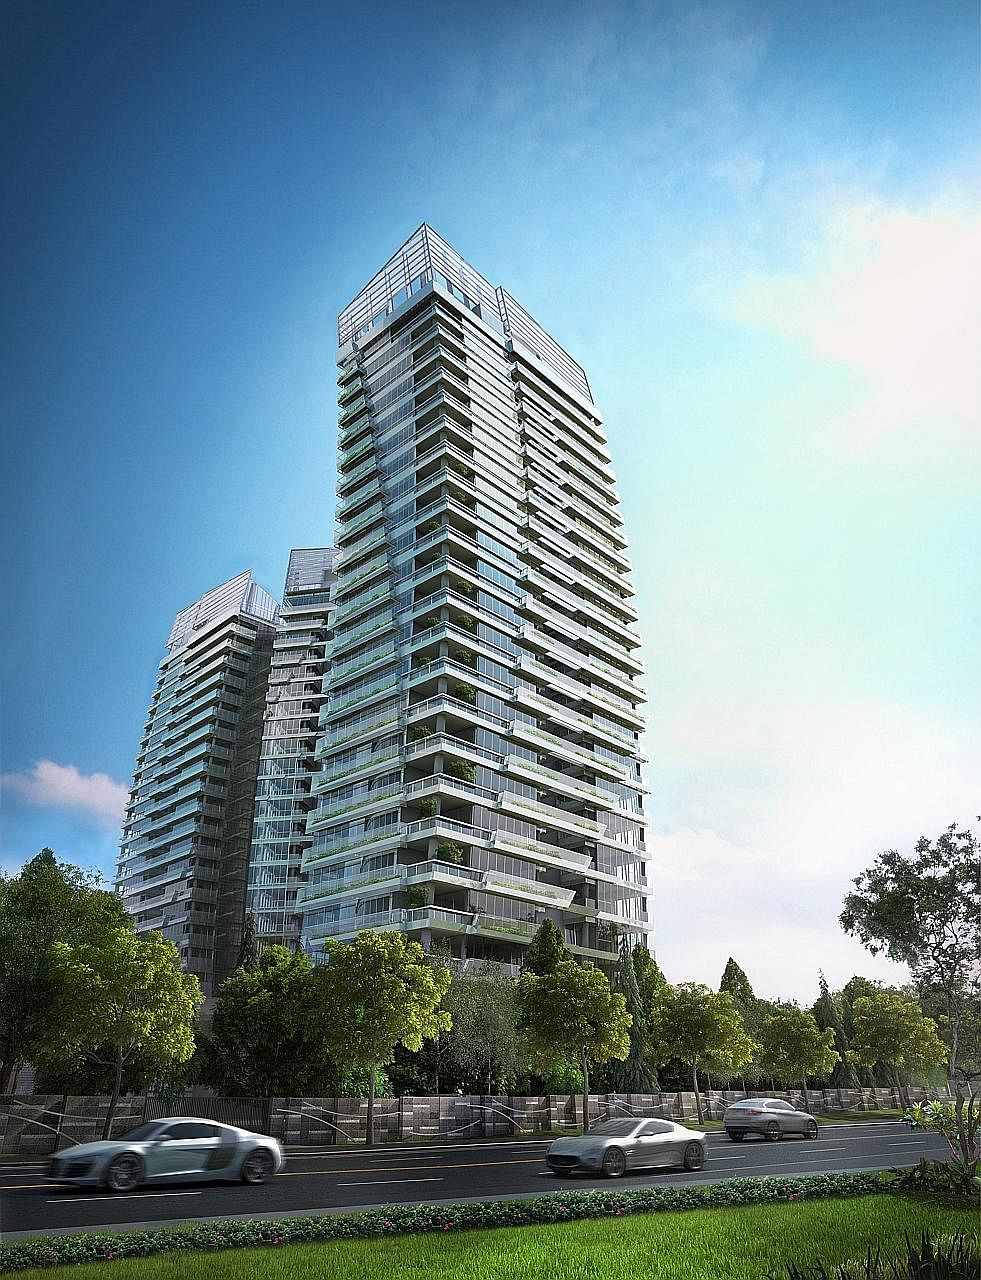 An artist's impression of Gramercy Park, a CDL freehold project in Grange Road. Even though it has not been officially launched, it has already sold 30 units at an average of about $2,600 psf.